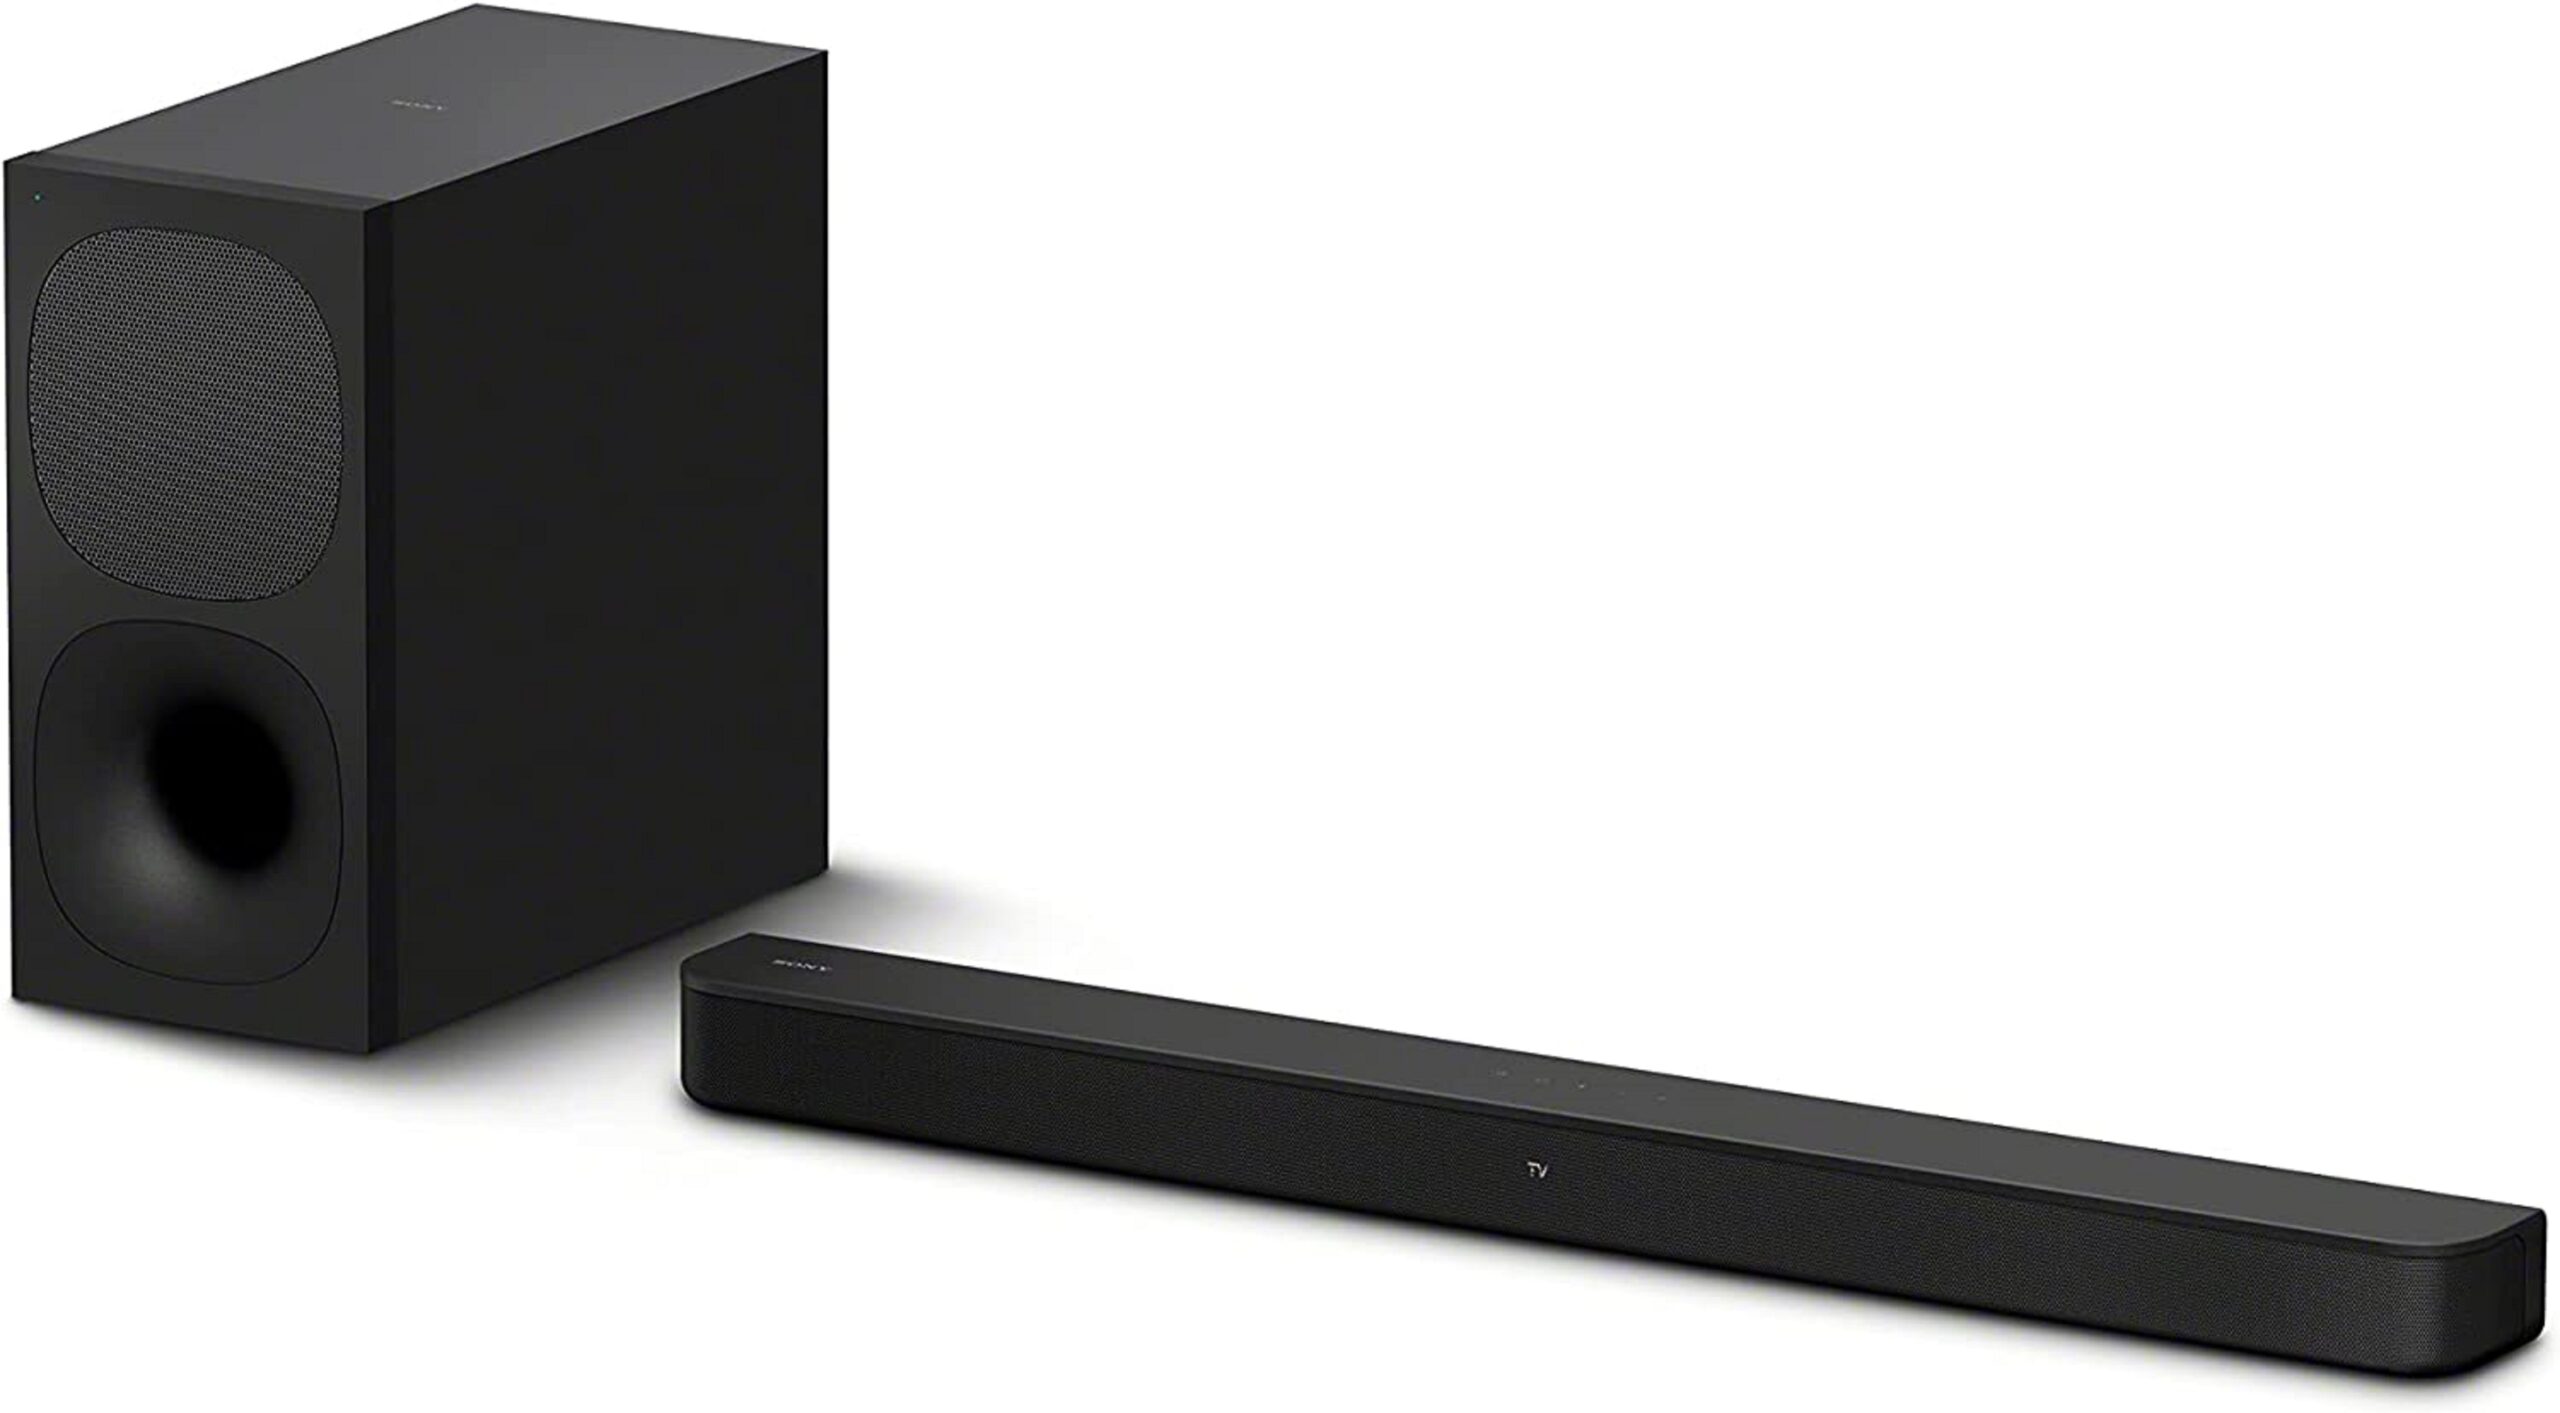 Upgrade Your Home Entertainment with Affordable Cinematic-Style Soundbars from Sony